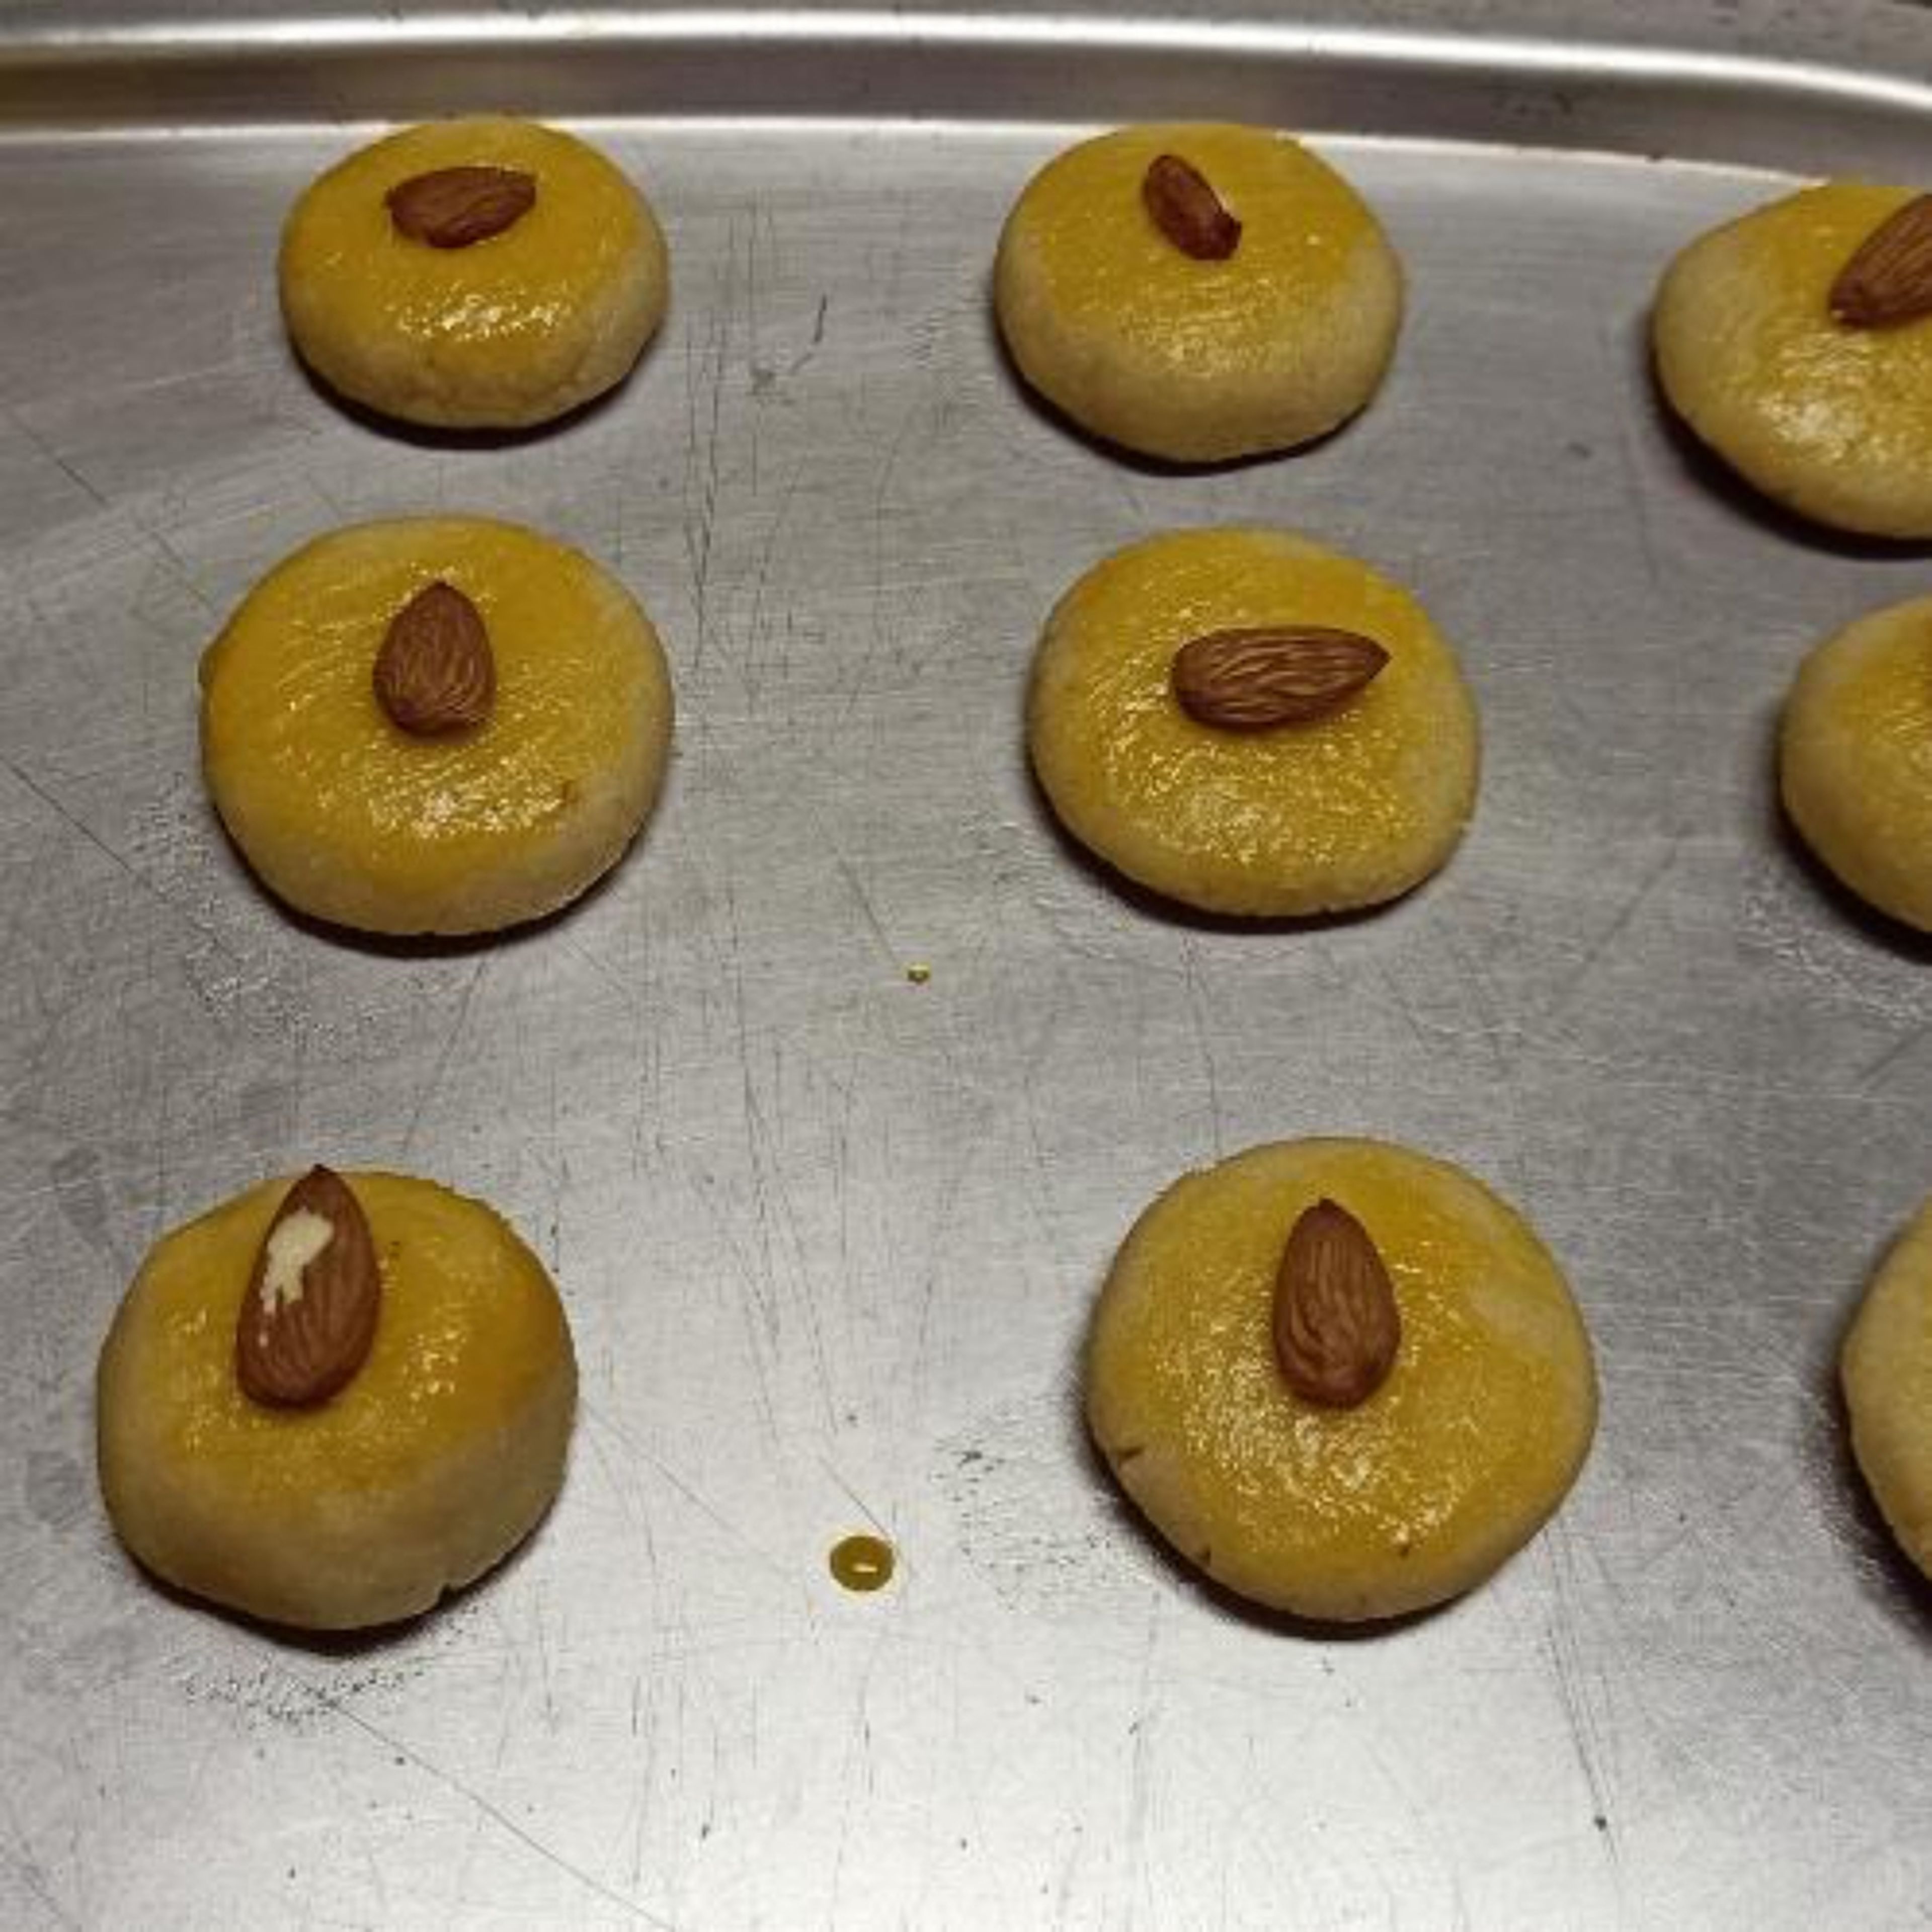 Beat the egg yolk in a small bowl. Using a pastry brush, lightly glaze the top of the cookie balls with the egg yolk.